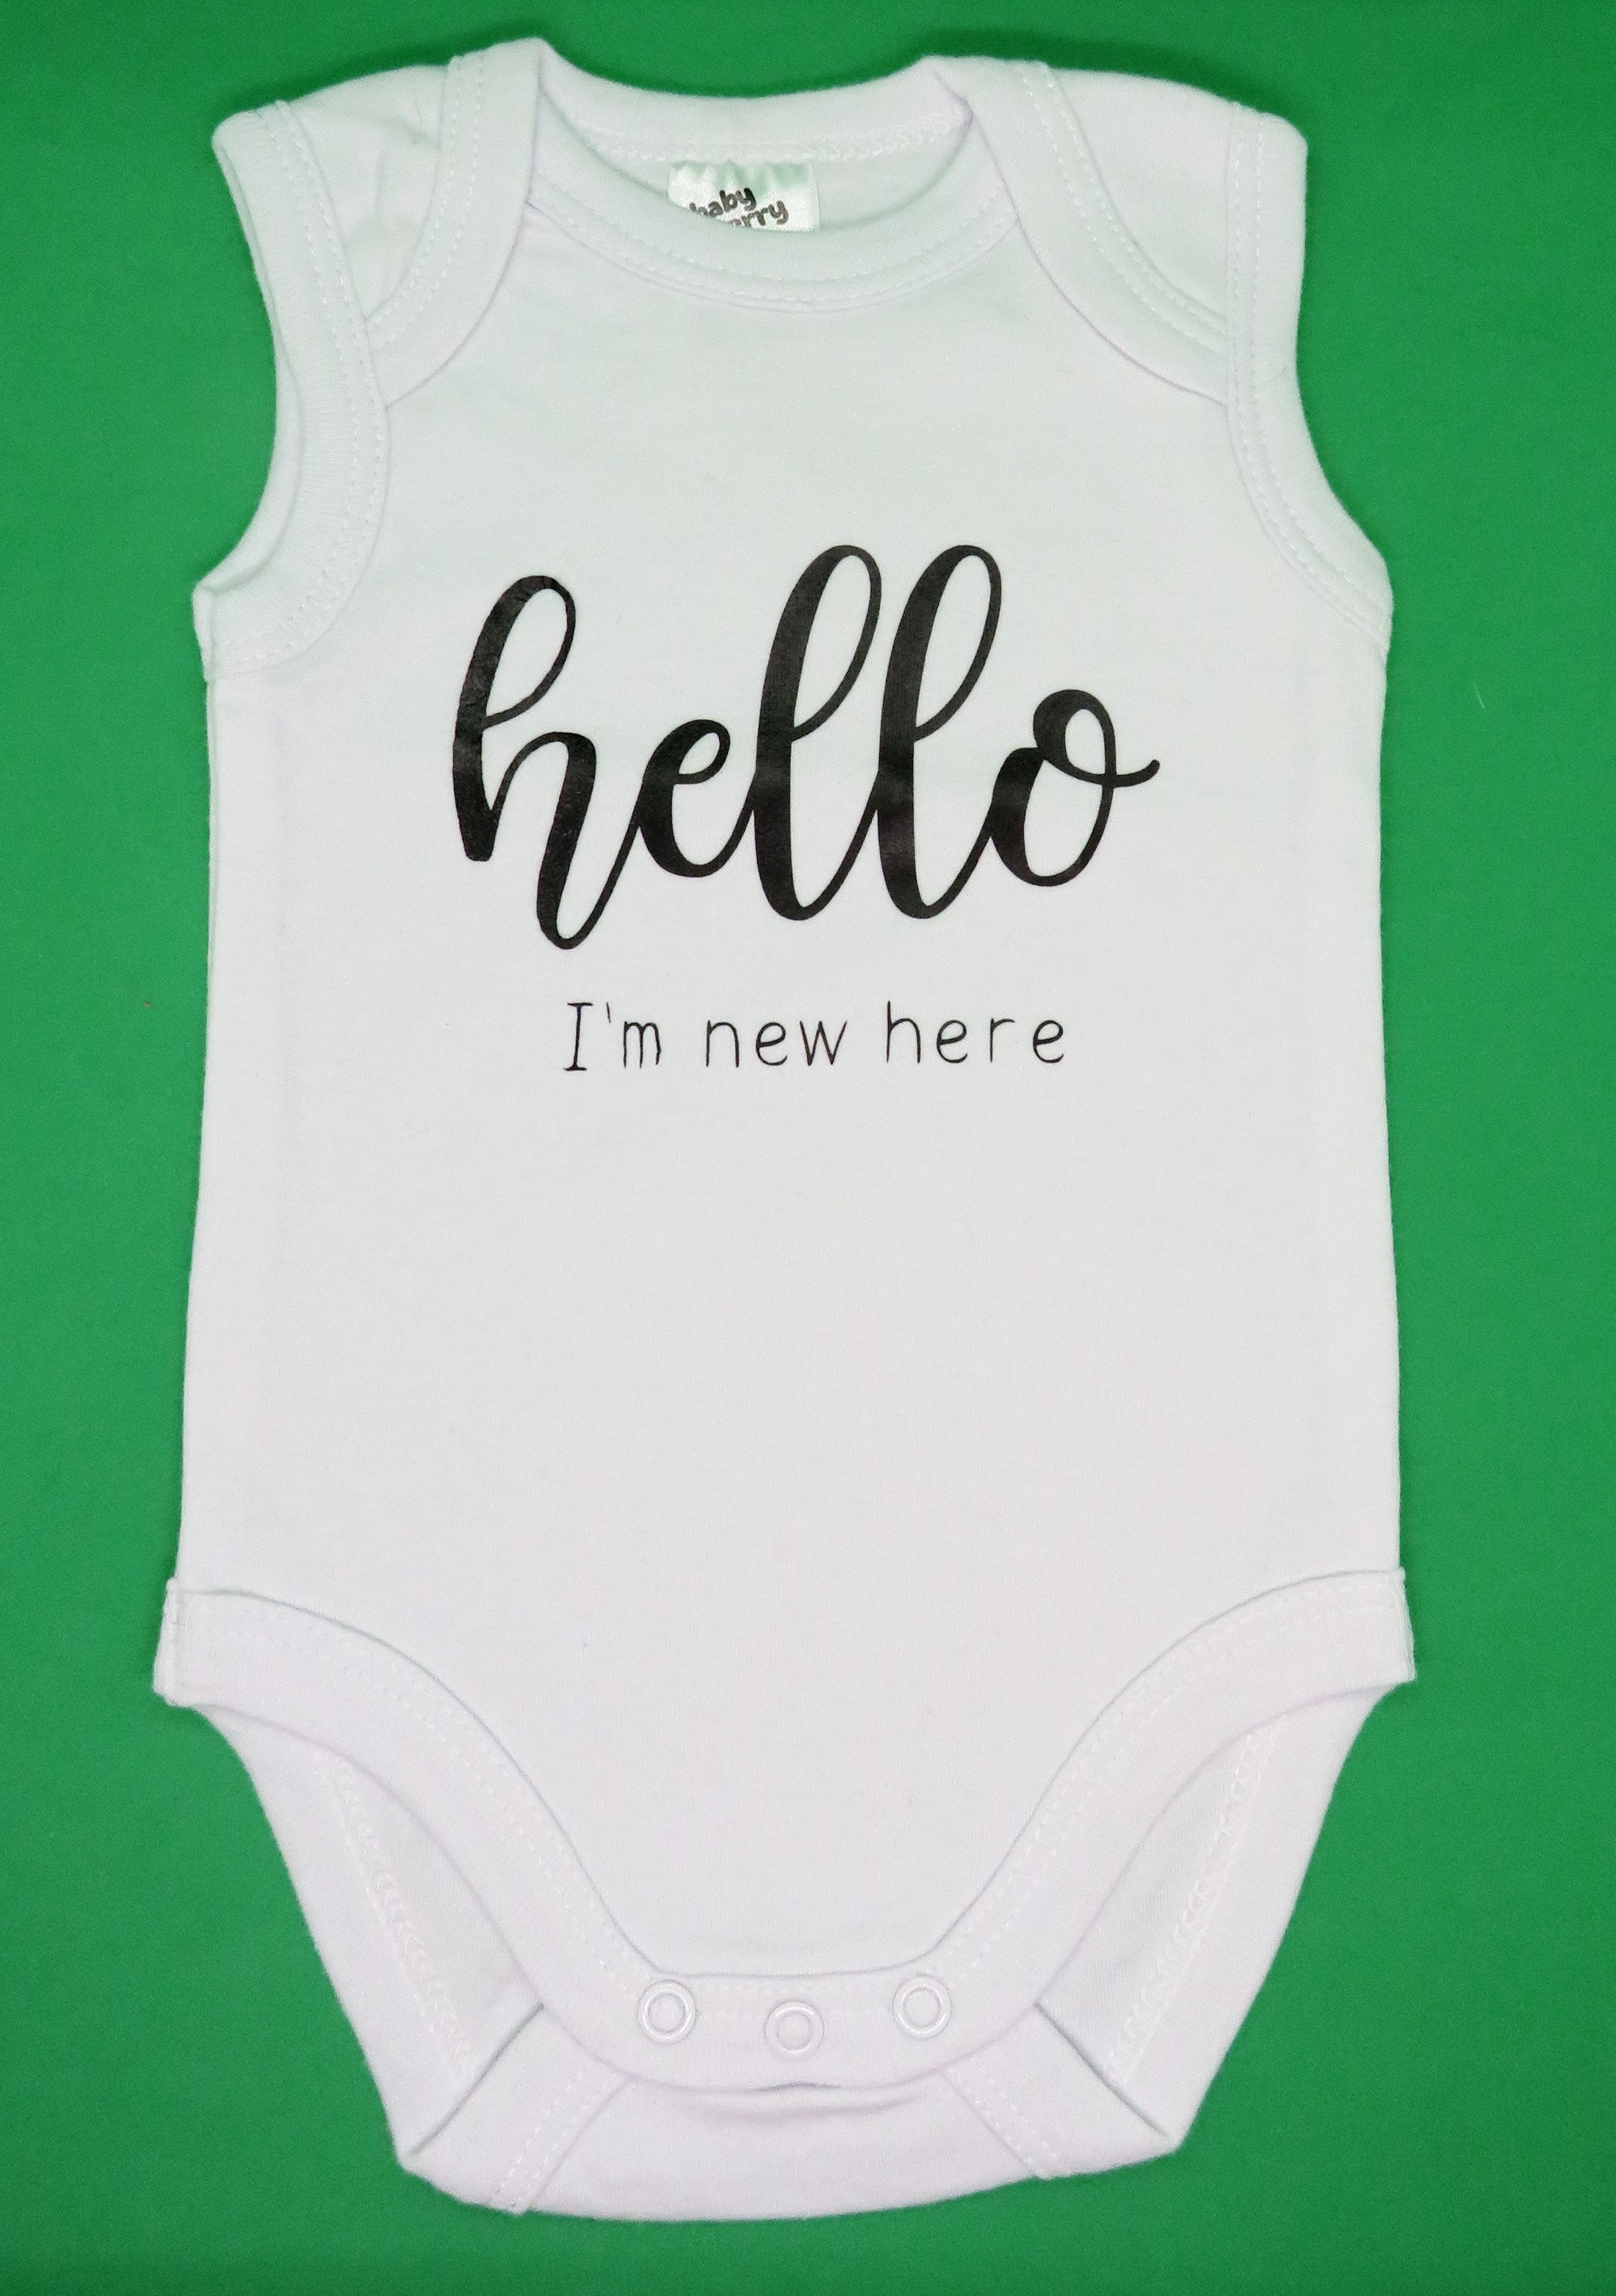 Perfect onsie for that new little one